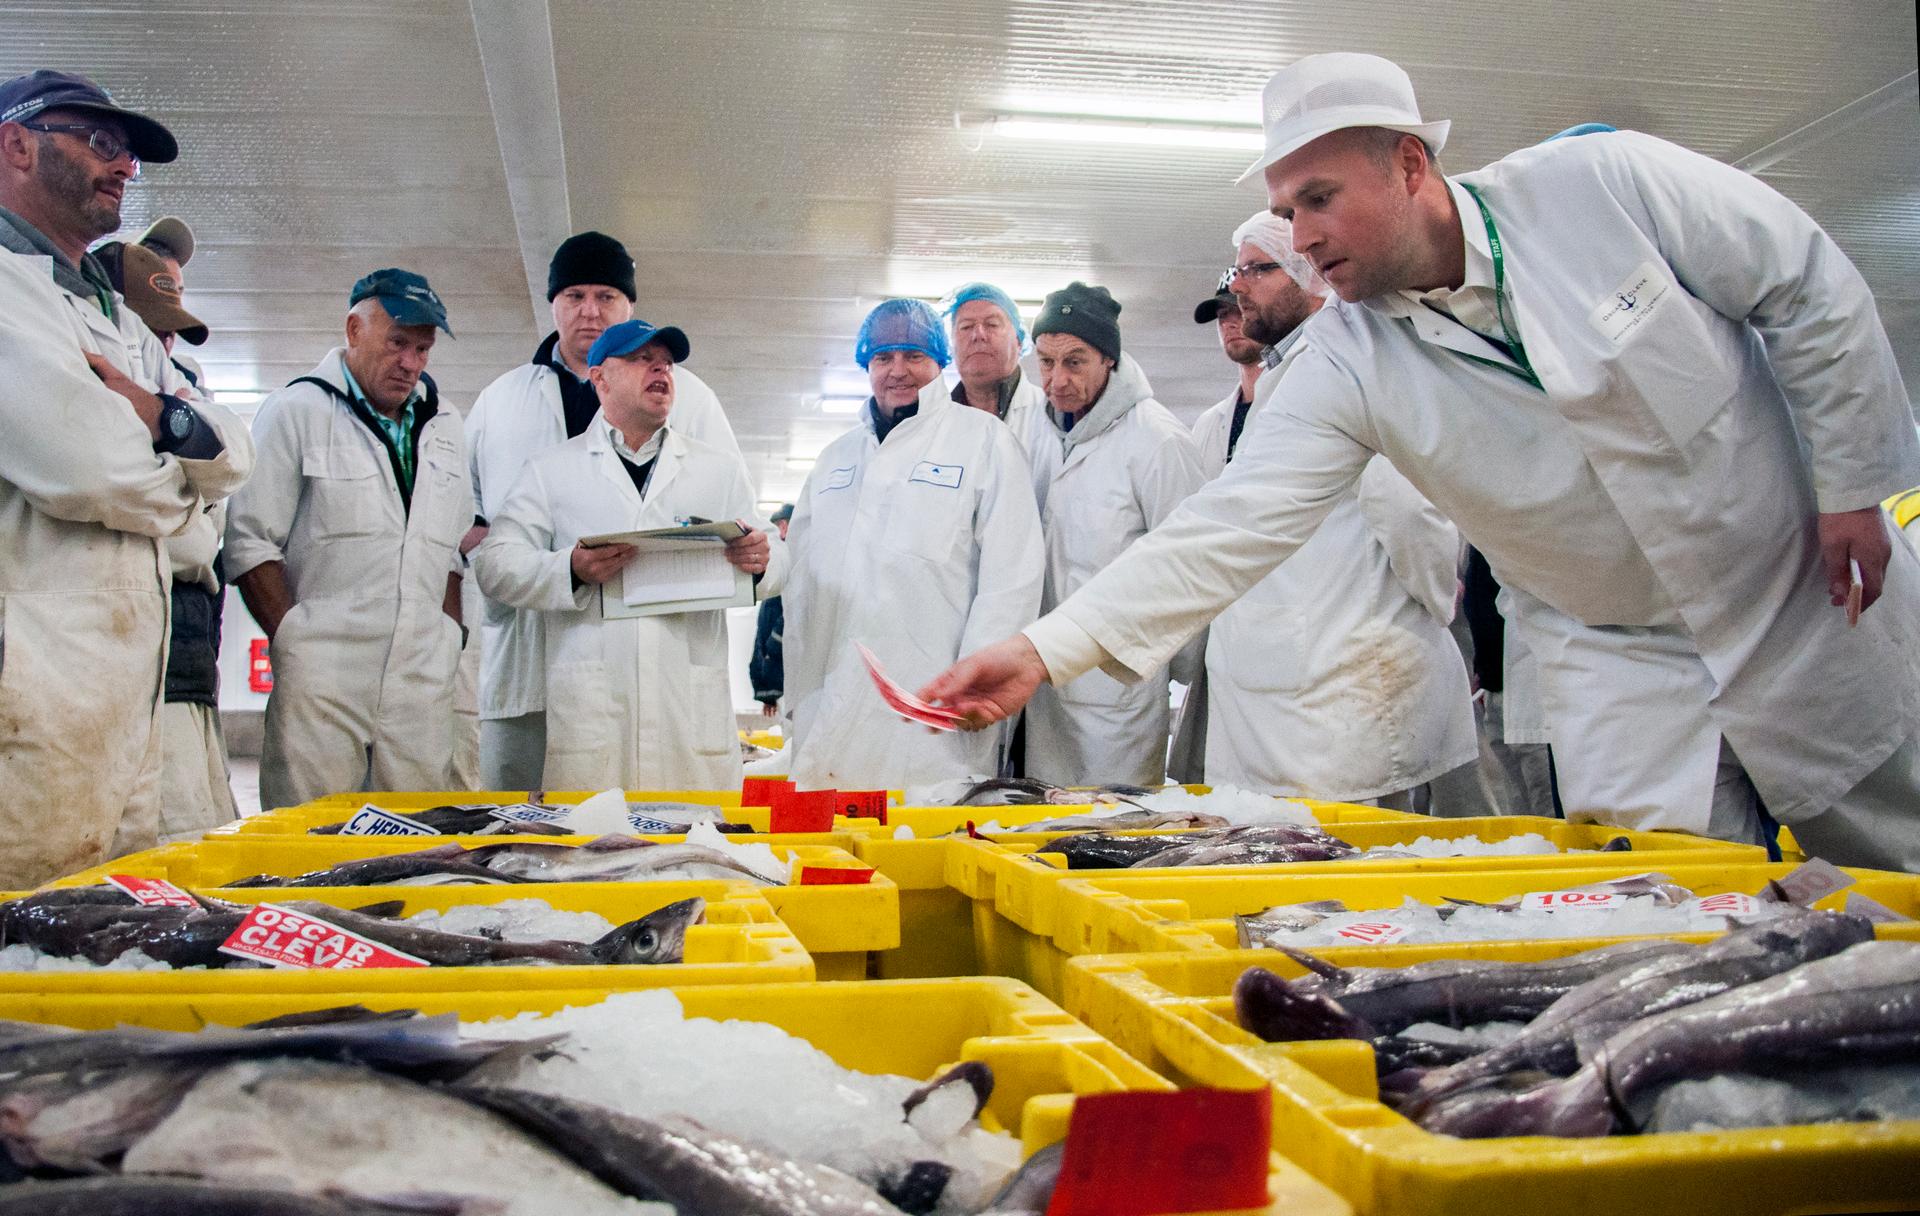 A fish auction underway at the Port of Grimsby.